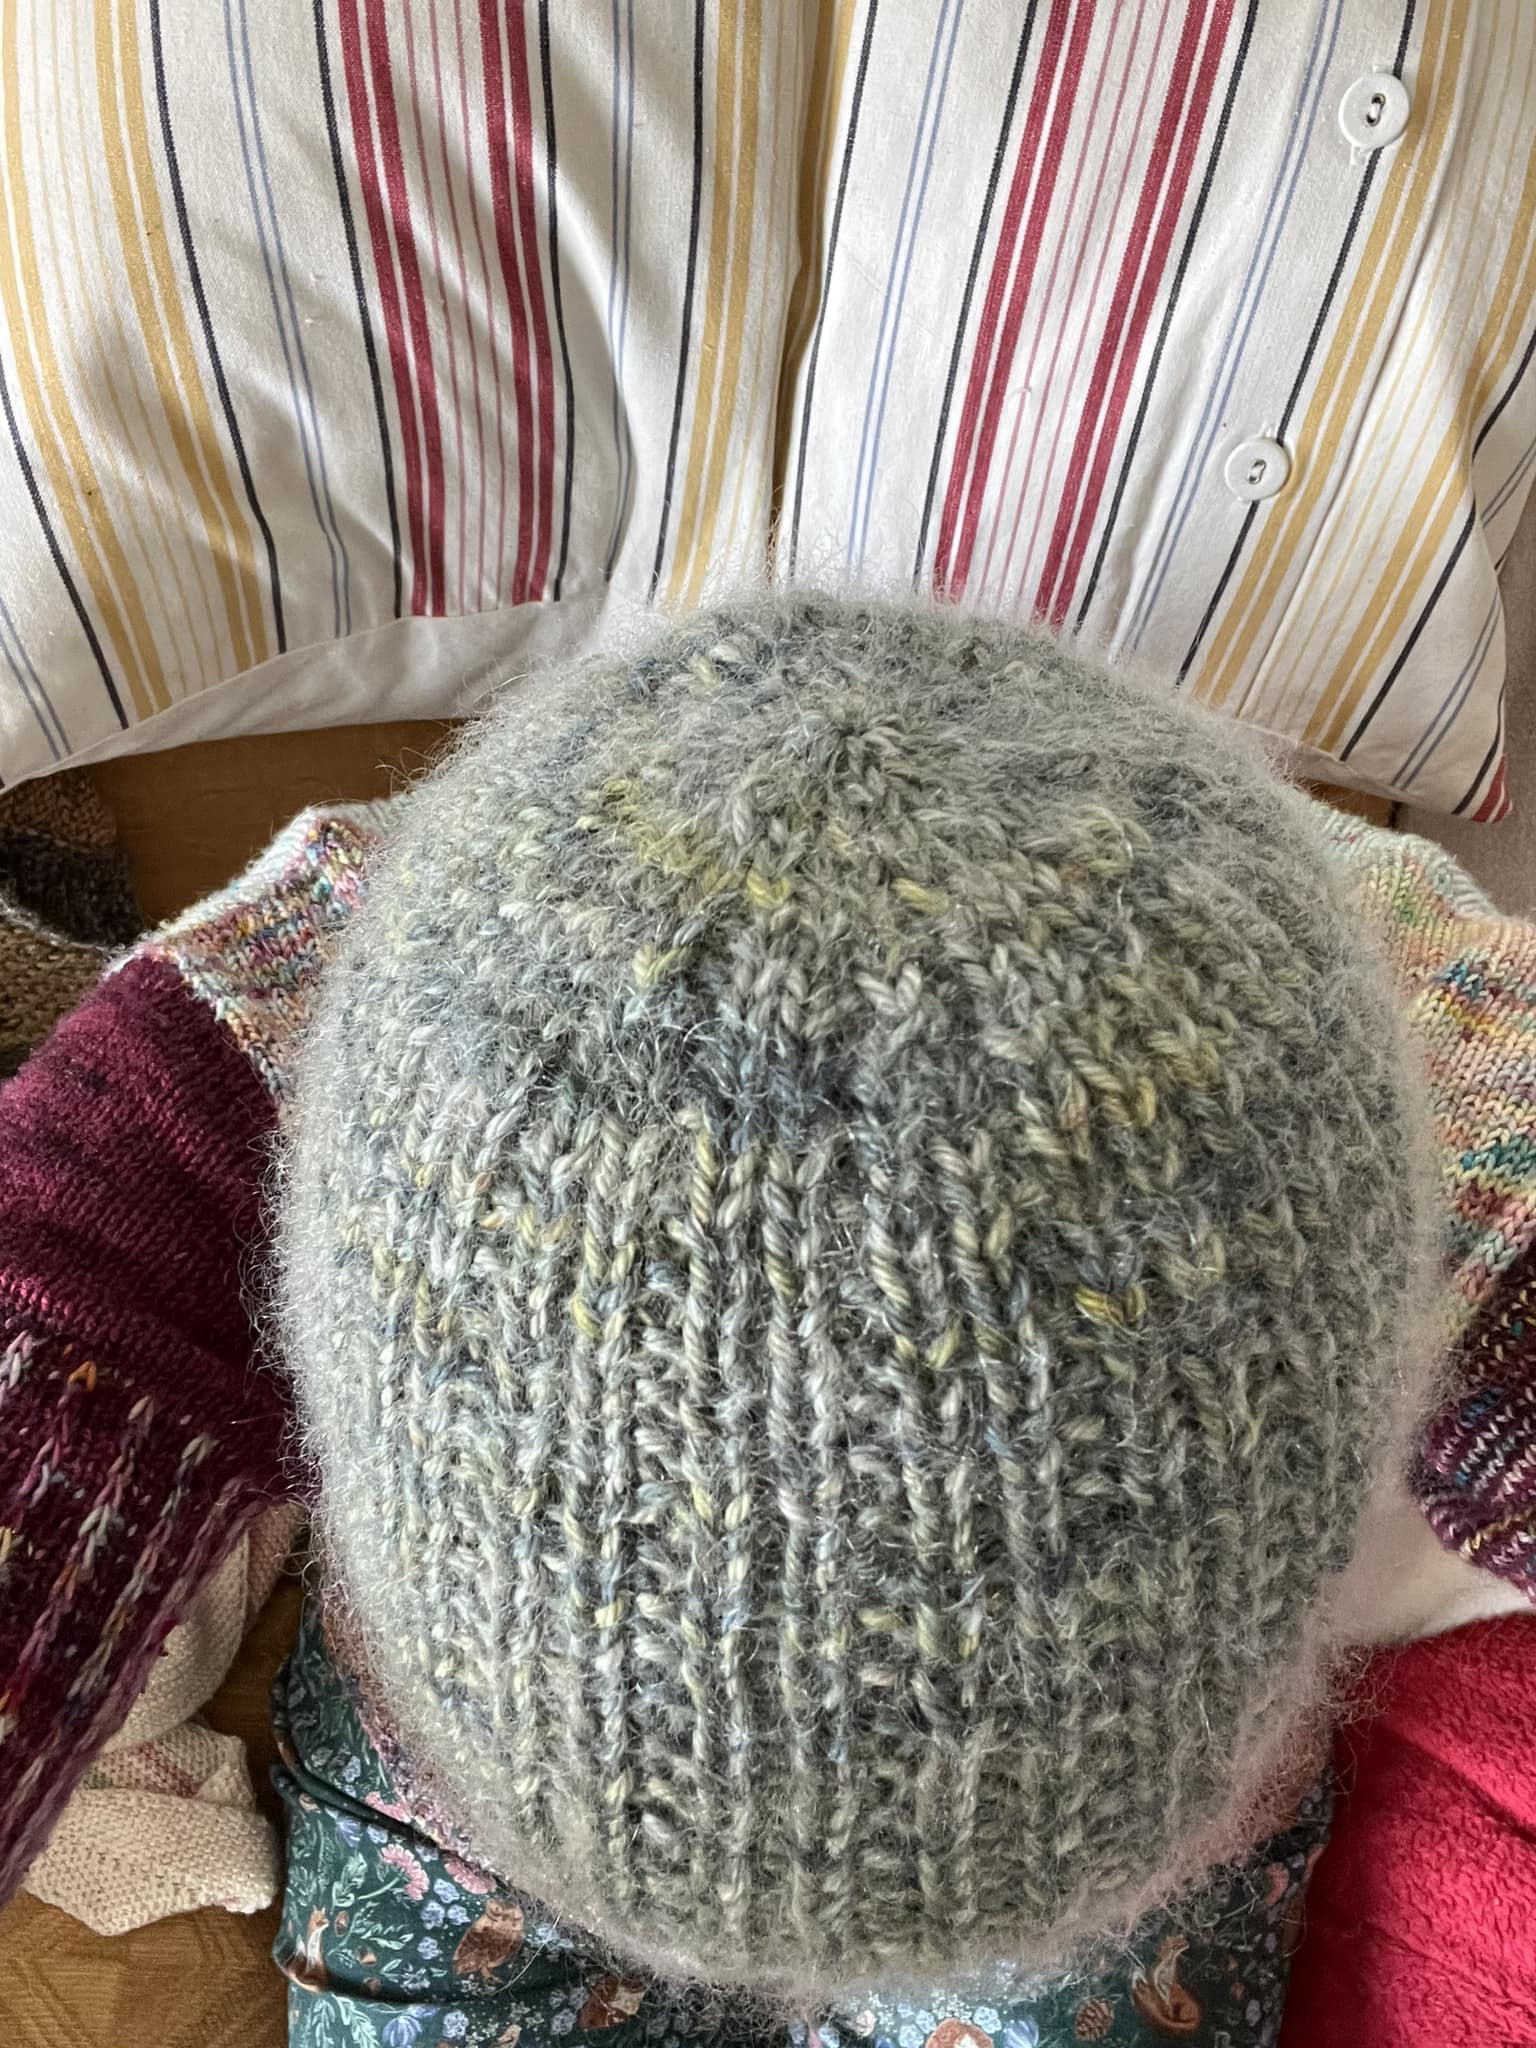 A view from above of a fuzzy knitted hat being modelled. The hat is blue, grey and green